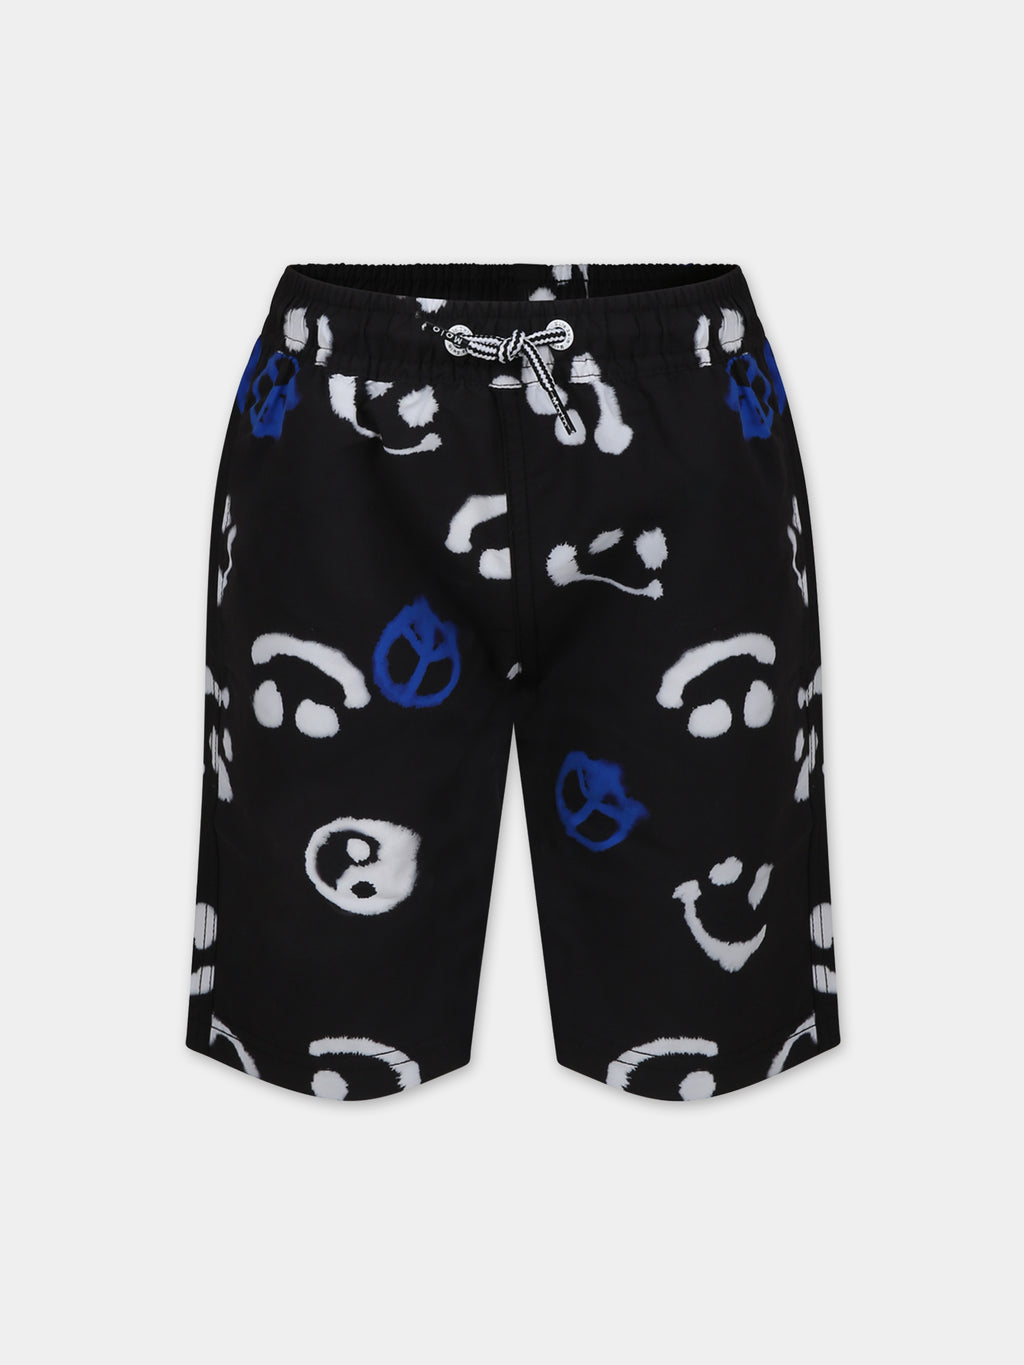 Black swimsuit for boy with smiley